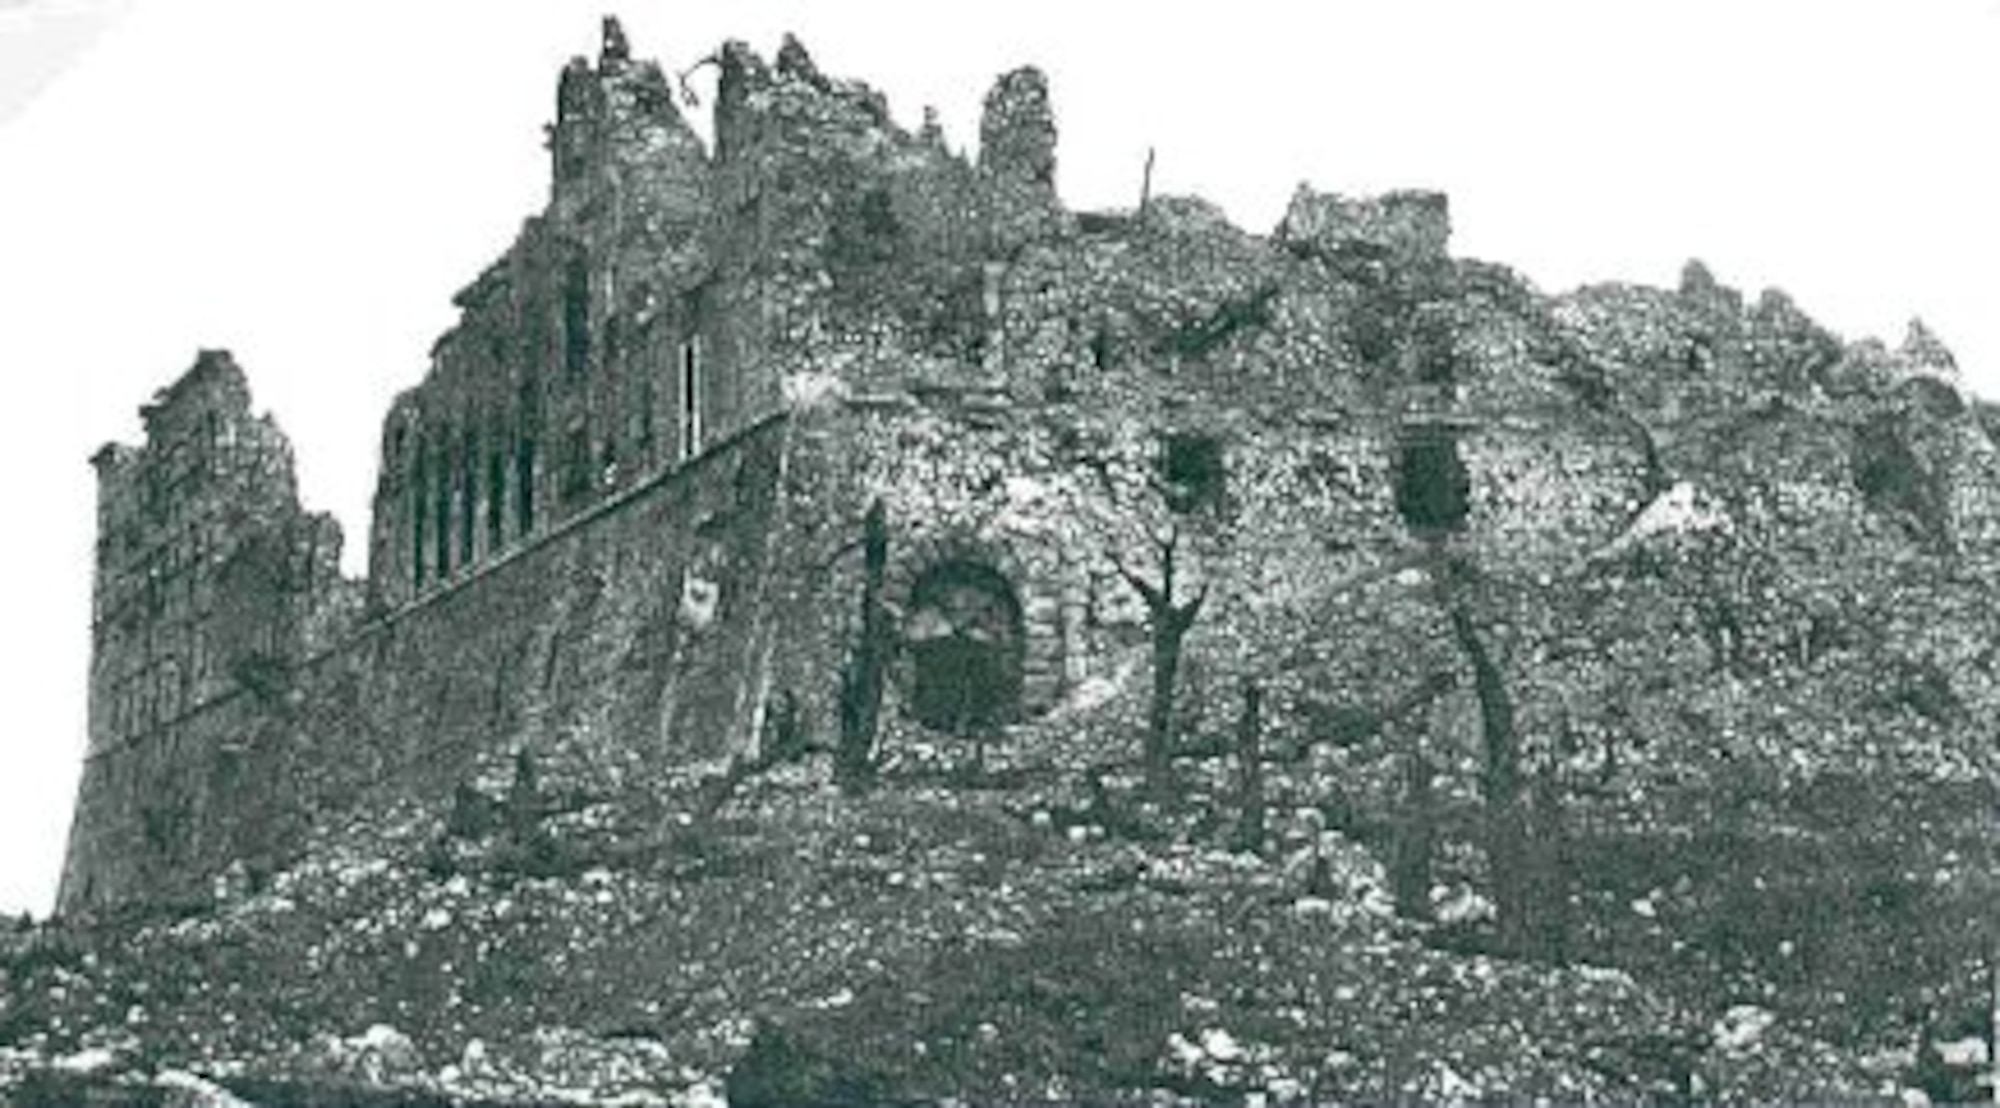 Ruins are all that’s left of the abbey at Monte Cassino in Italy after the aerial bombardment by B-17s from the 2nd Bomb Wing. The abbey was deemed a legitimate target due to military necessity during the battle, which lasted several months.  The German commander denied his forces were using the historical monastery for military purposes.  Historians and investigators later concluded he was, in fact, correct.  The official record was corrected by the Office of the Chief of Military History in 1969.   (Courtesy photo)